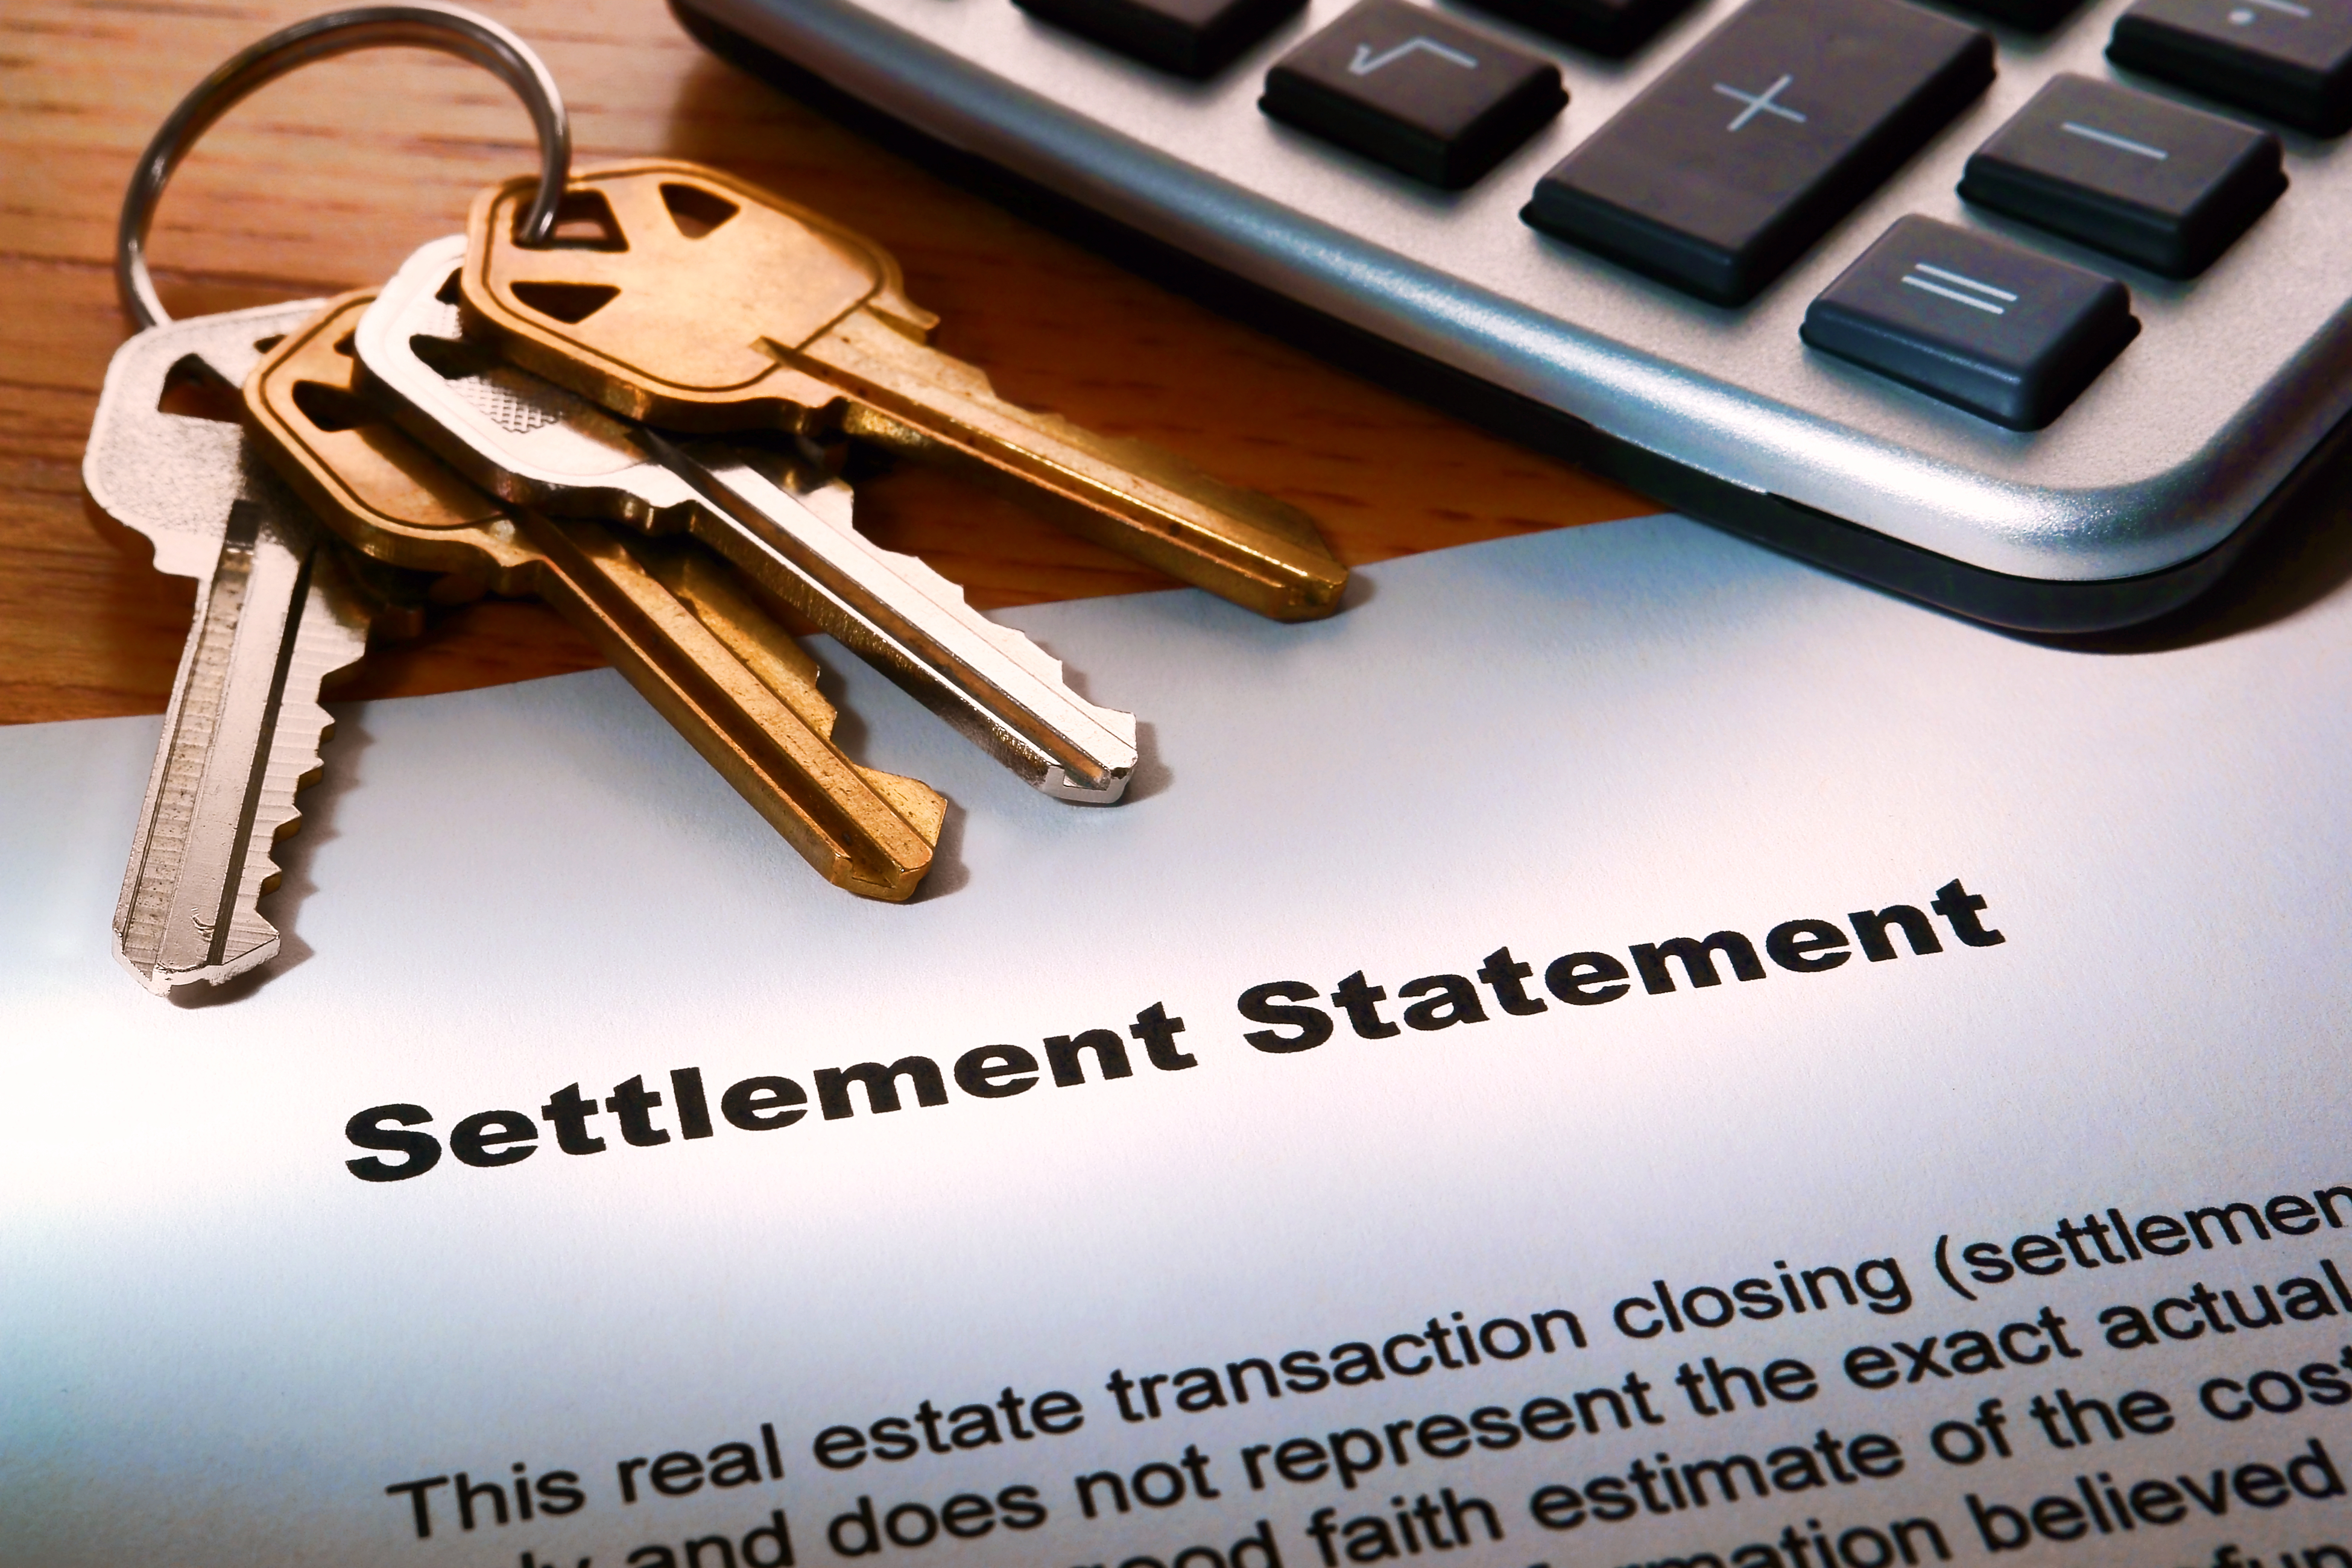 What is settlement delay?